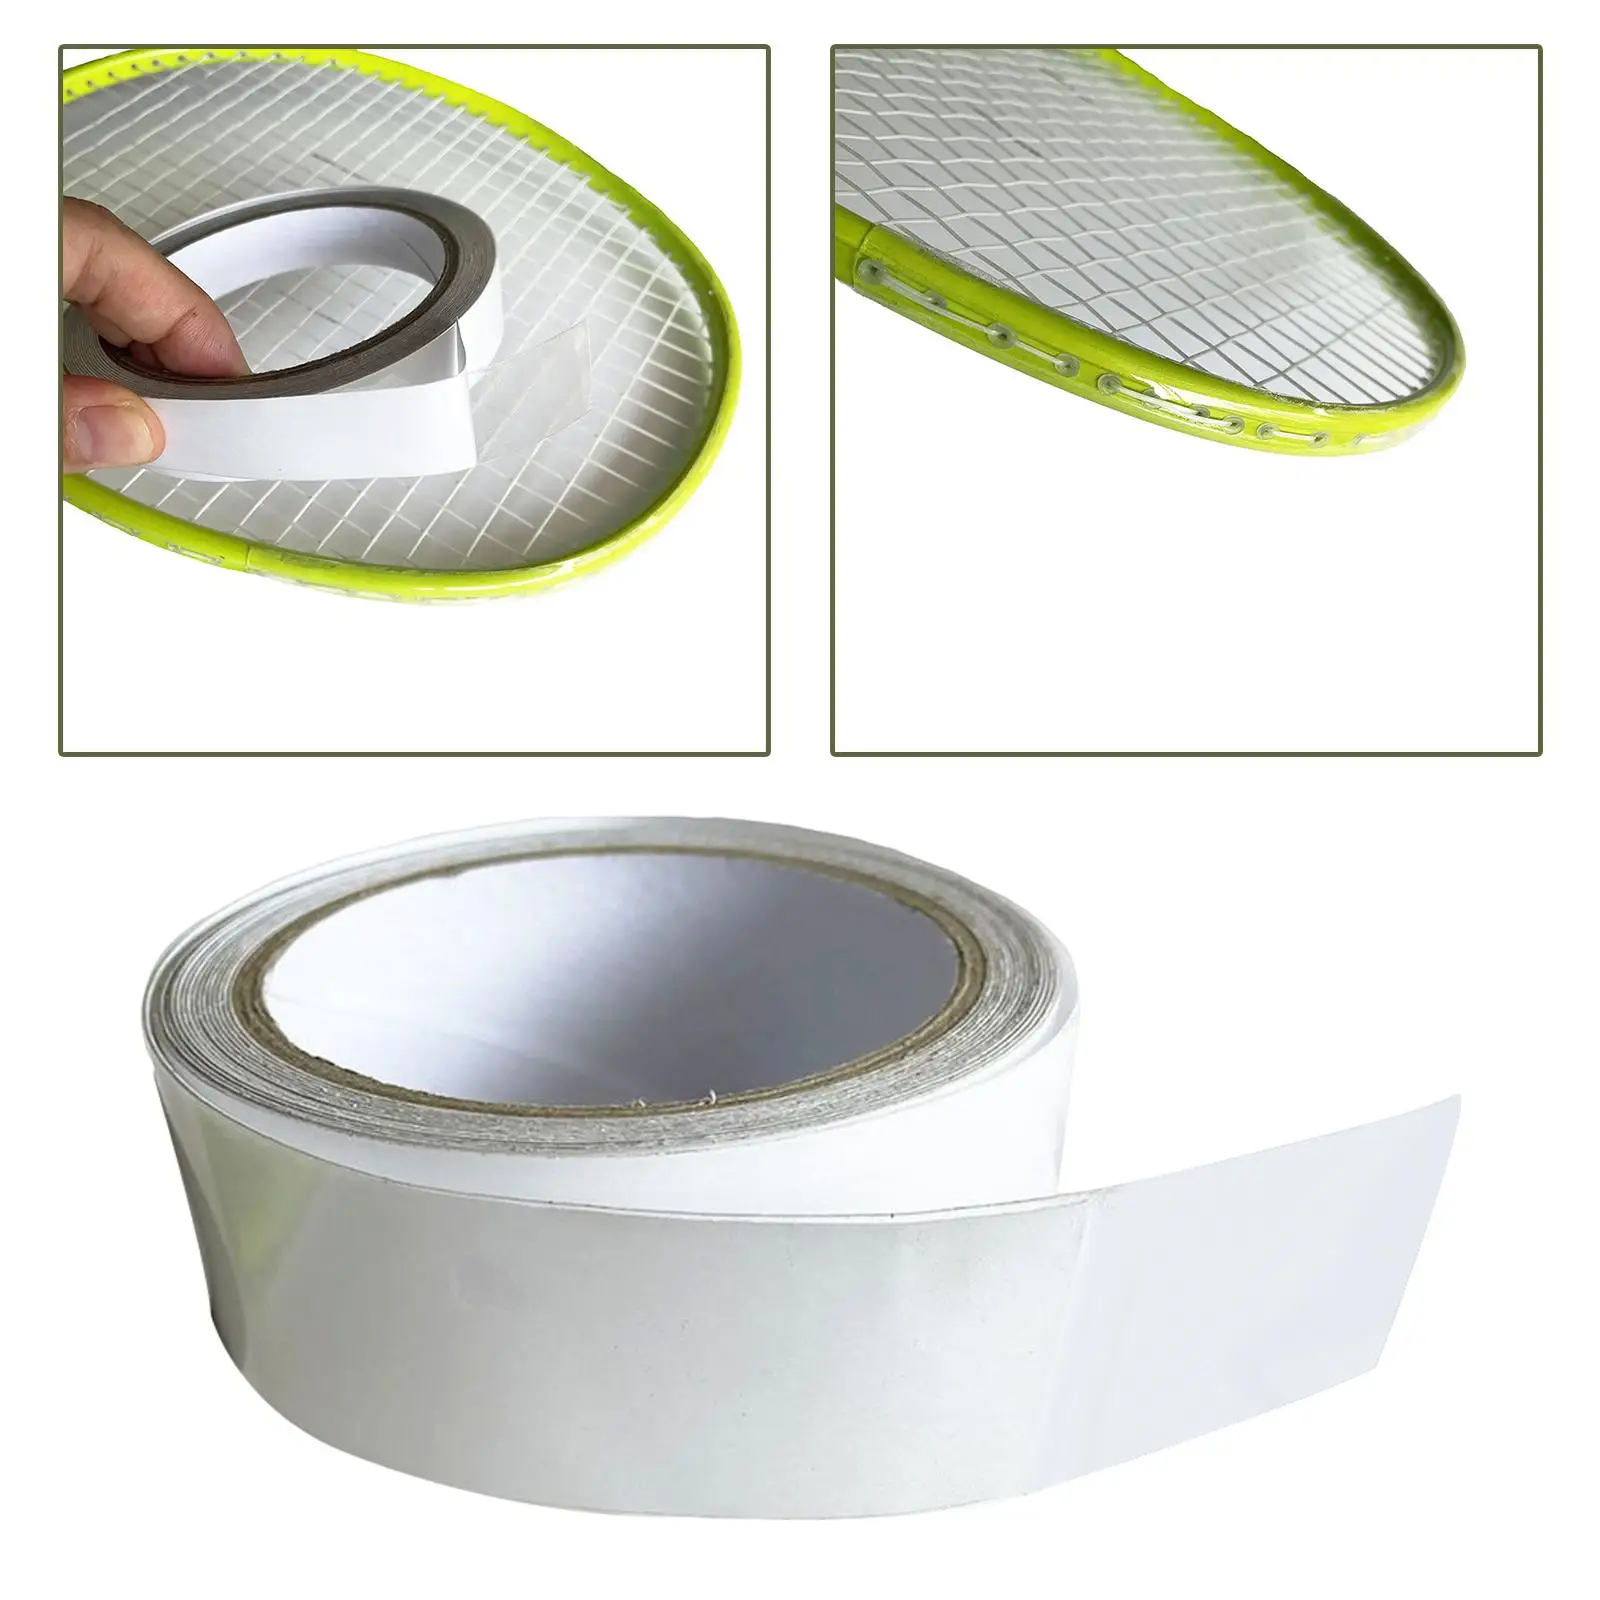 1 Roll Racket Head ors, Racket Head  Tape Convenient Practical for Tennis Racket, Outdoor Sports Accessories